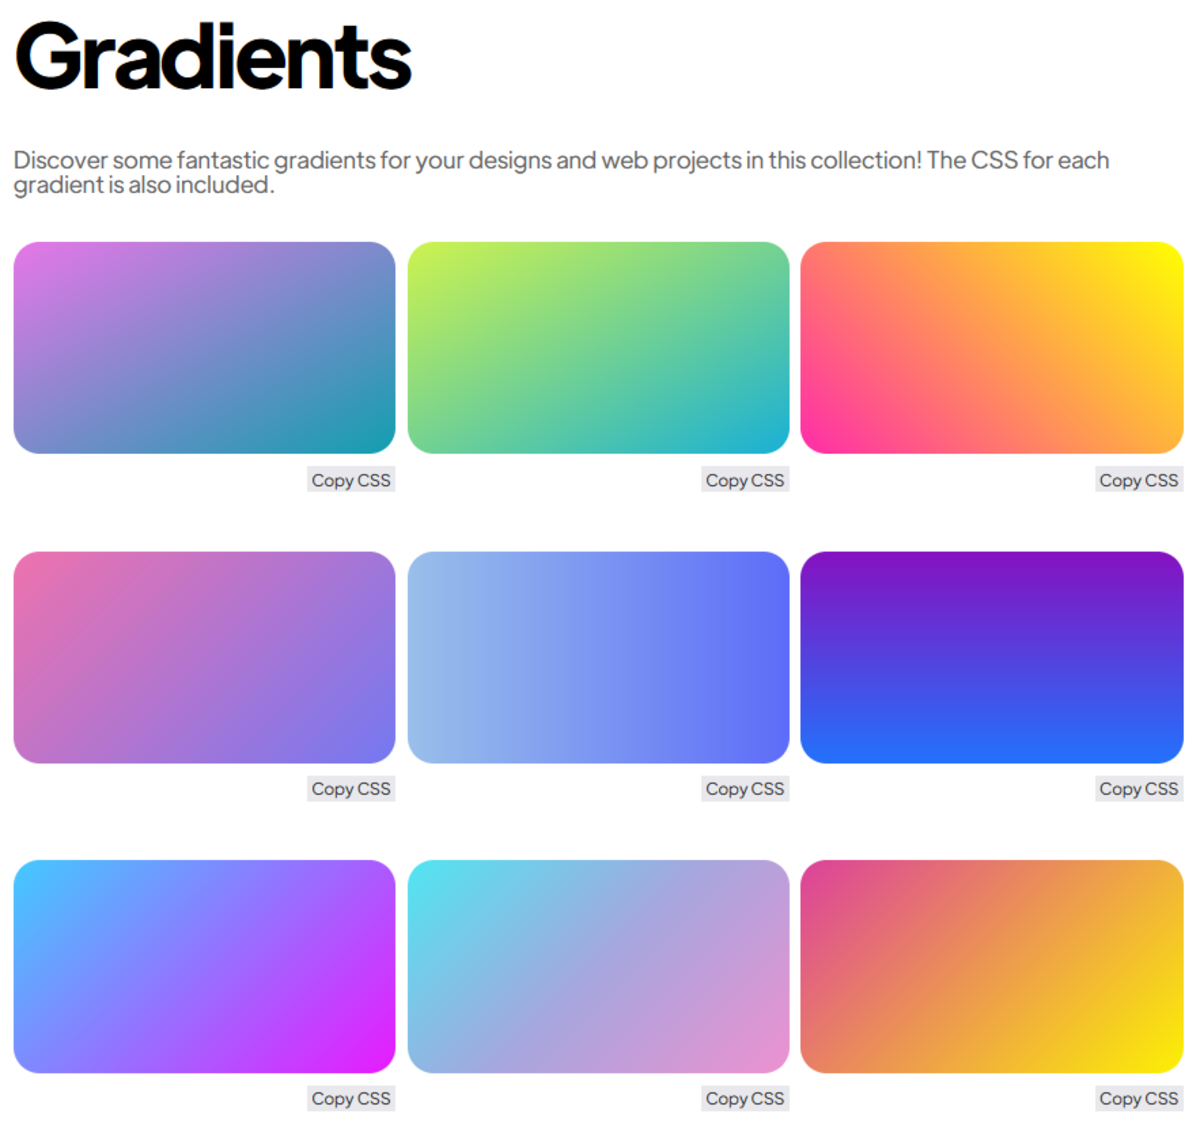 How to Add a Linear Gradient Background to Your Website  The Ultimate Guide - 17